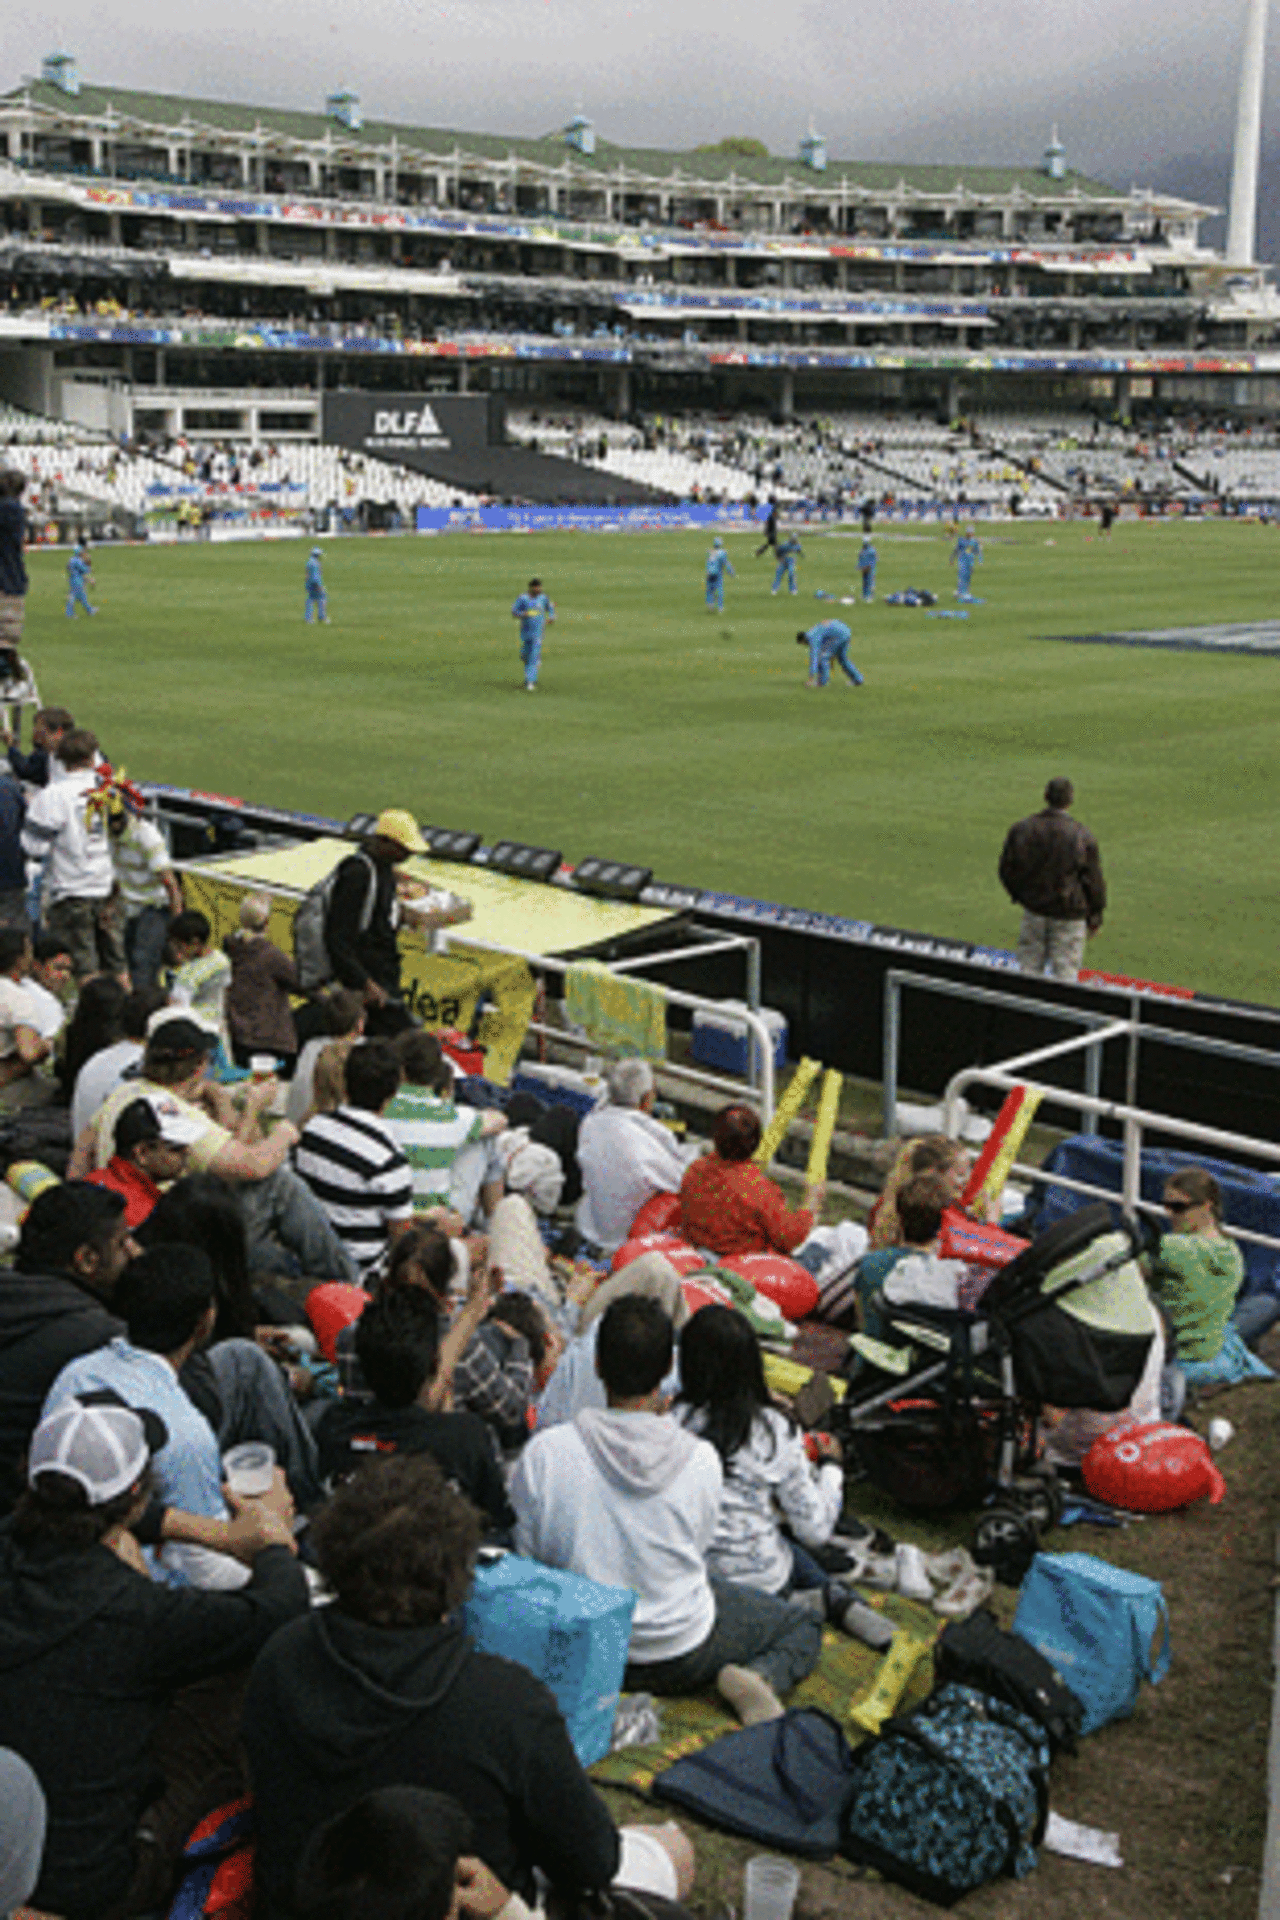 The crowd watches Mumbai Indians warm up ahead of their first game, Chennai Super Kings v Mumbai Indians, IPL, 1st game, Cape Town, April 18, 2009